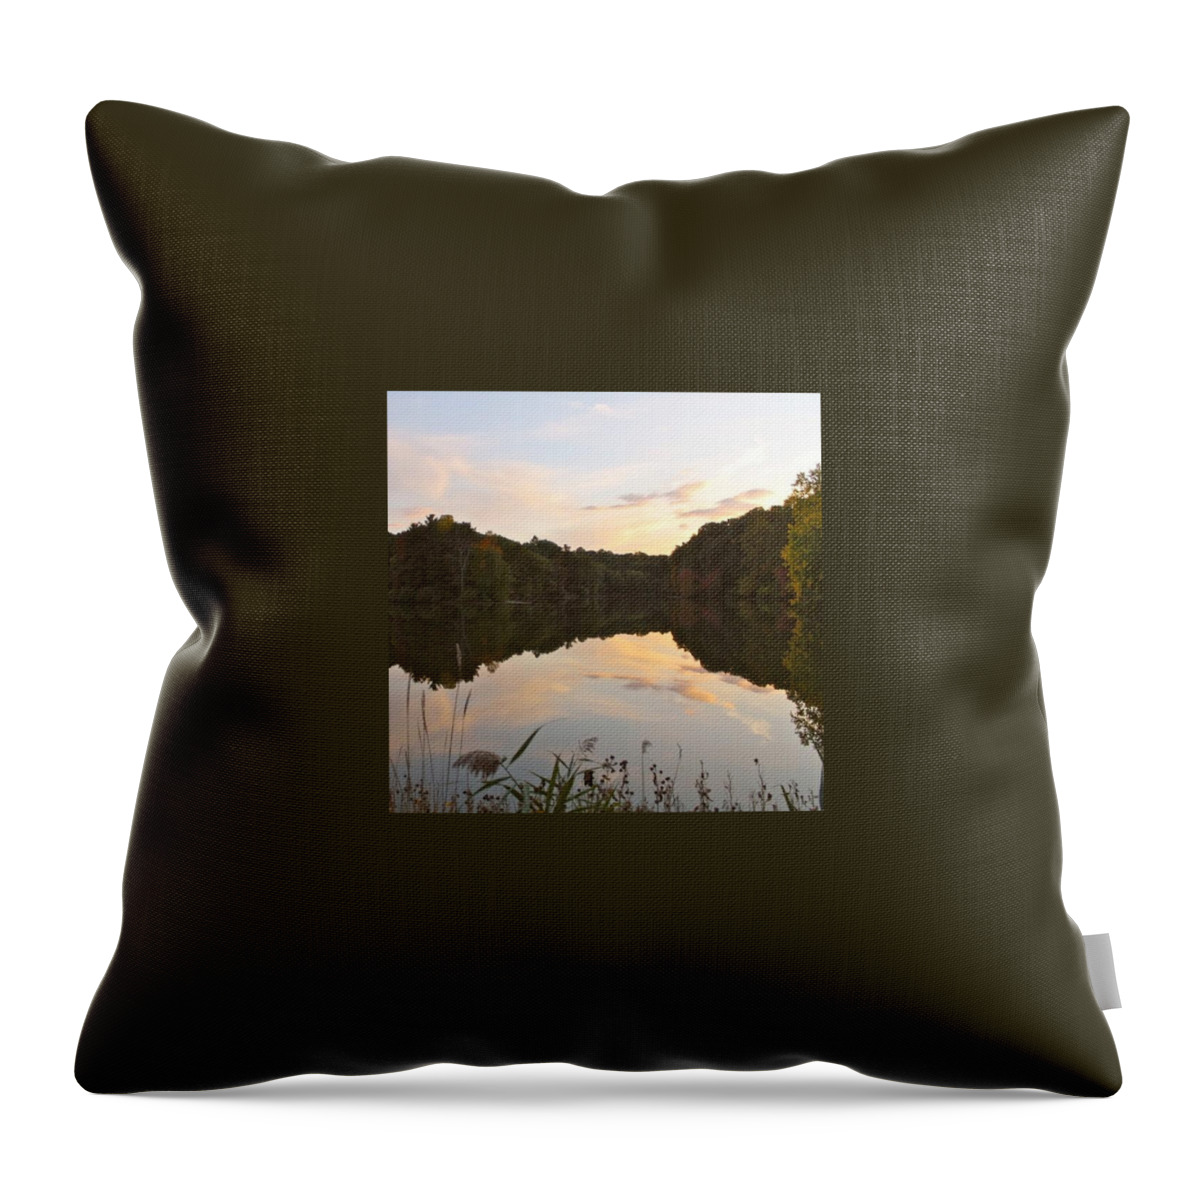 Sunset Throw Pillow featuring the photograph Durand Lake At Twilight by Justin Connor